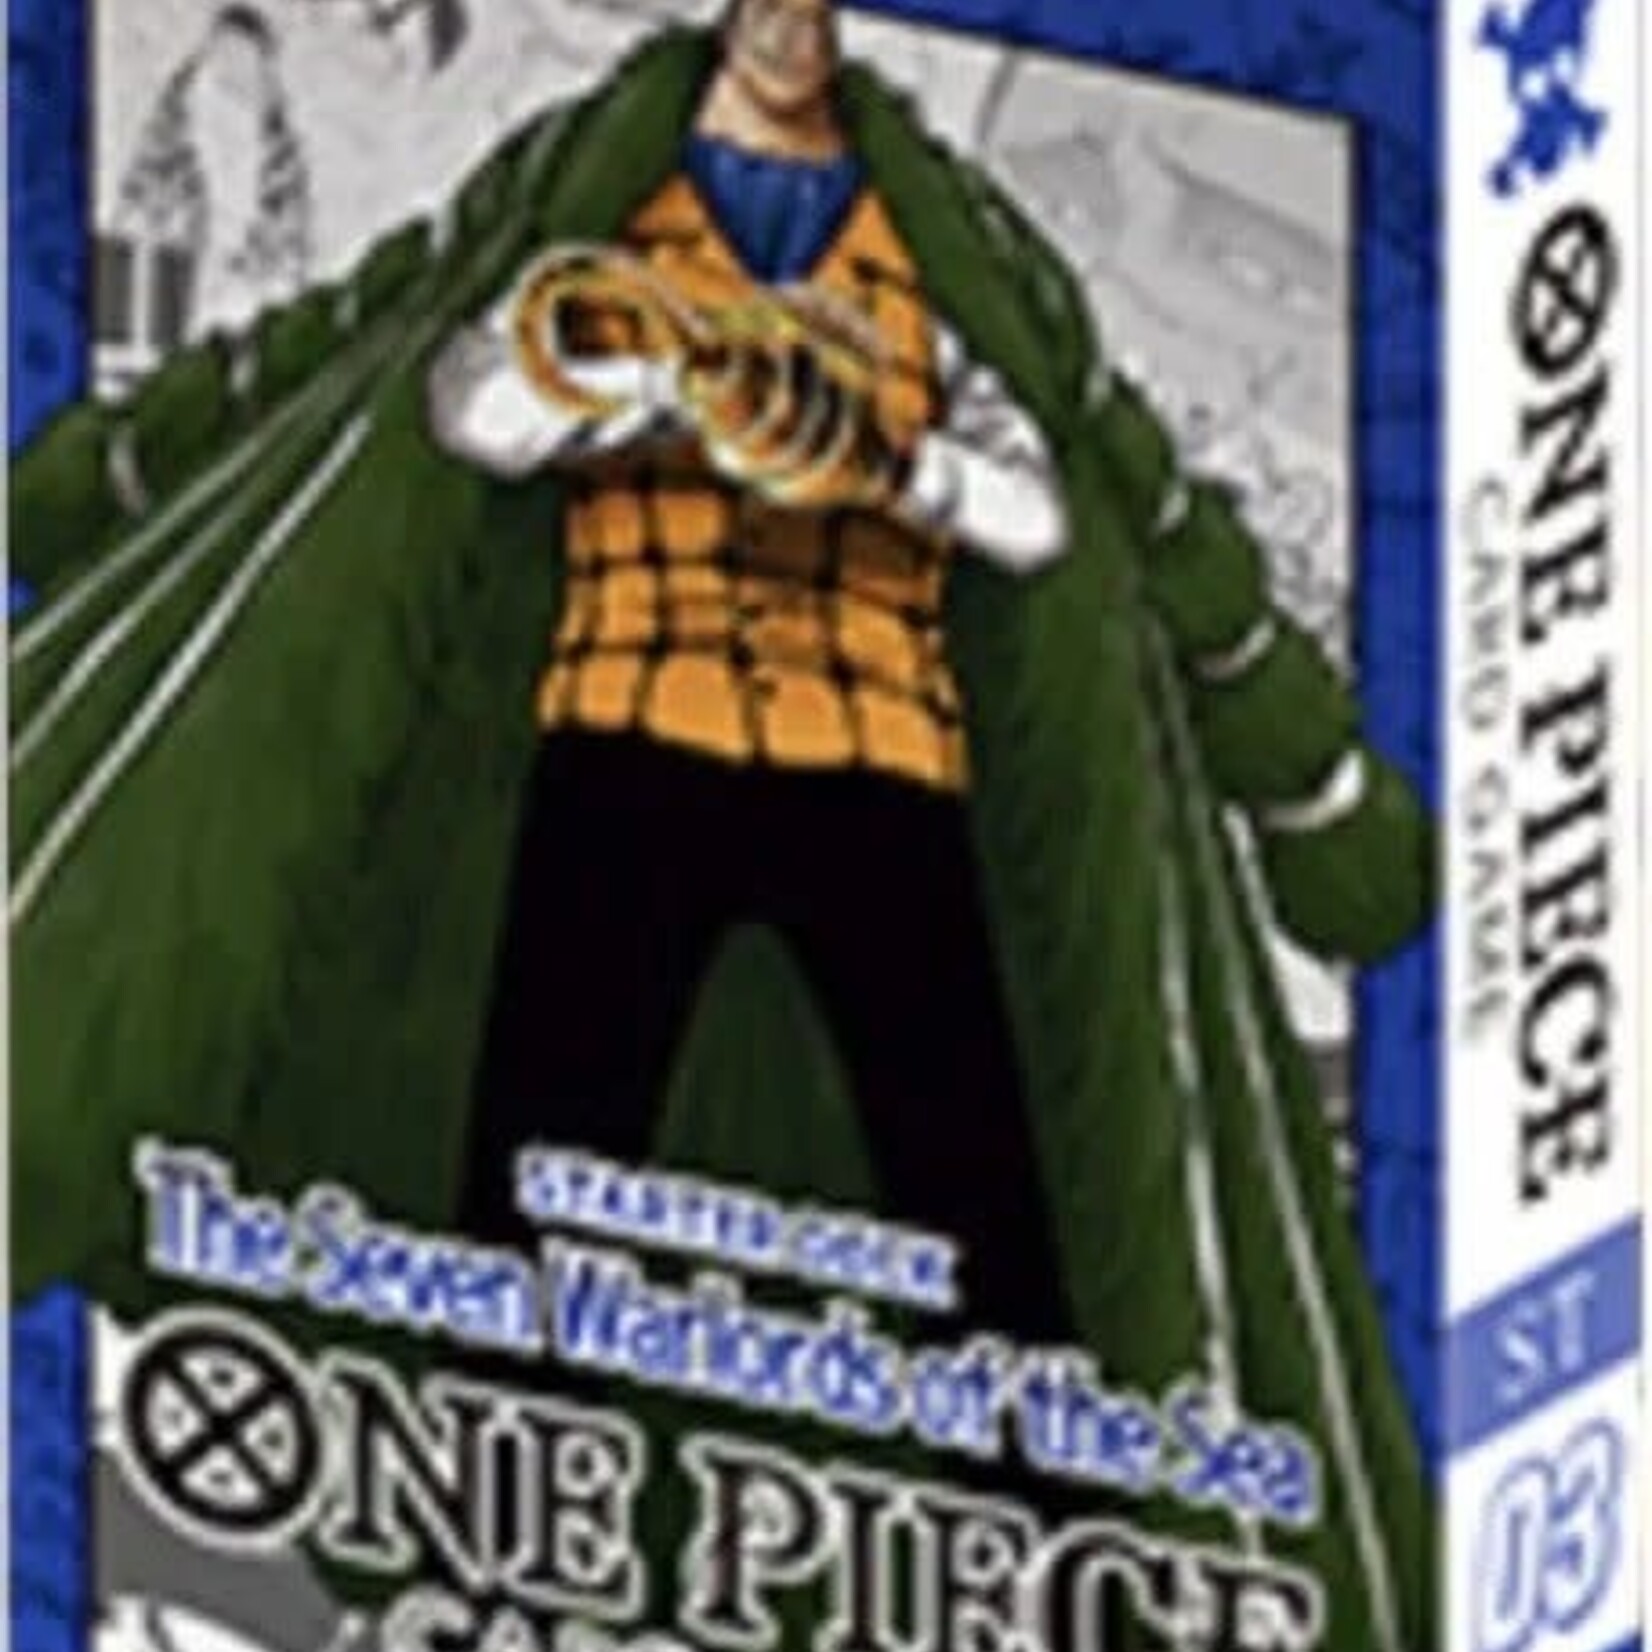 Bandai One Piece TCG: The Seven Warlords of the Sea Starter Deck